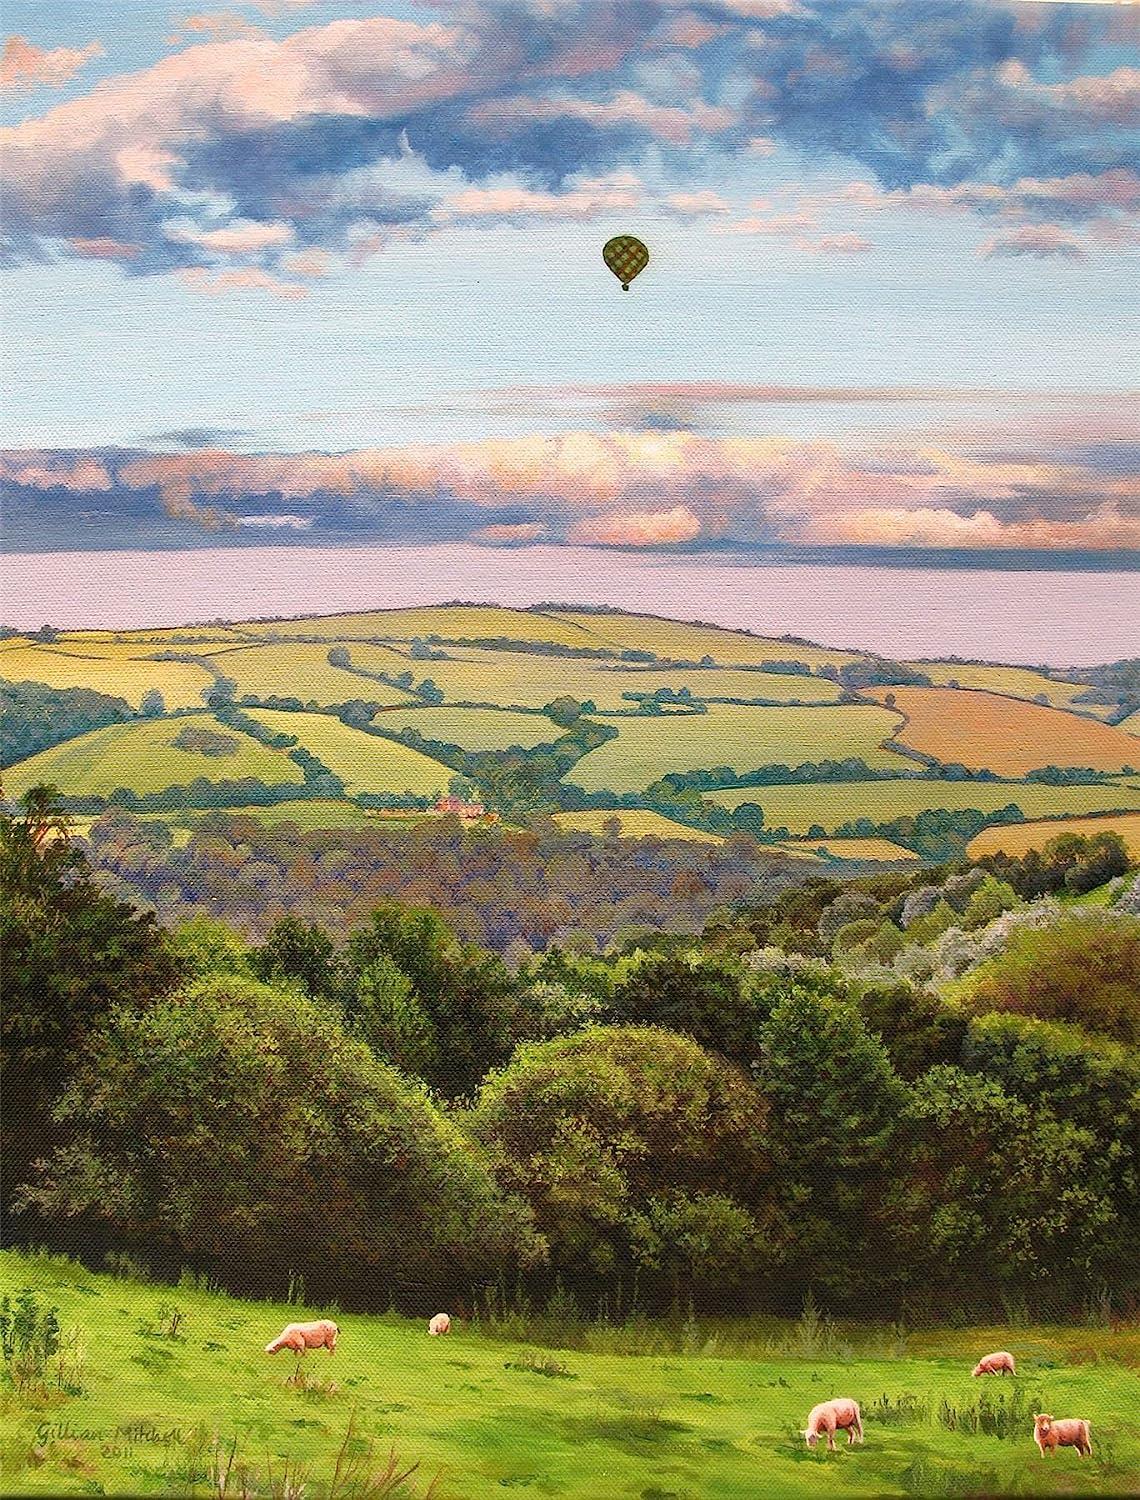 Hot Air Balloon, Gill Erskine-Hill  Jigsaw Puzzle (1000 Pieces)